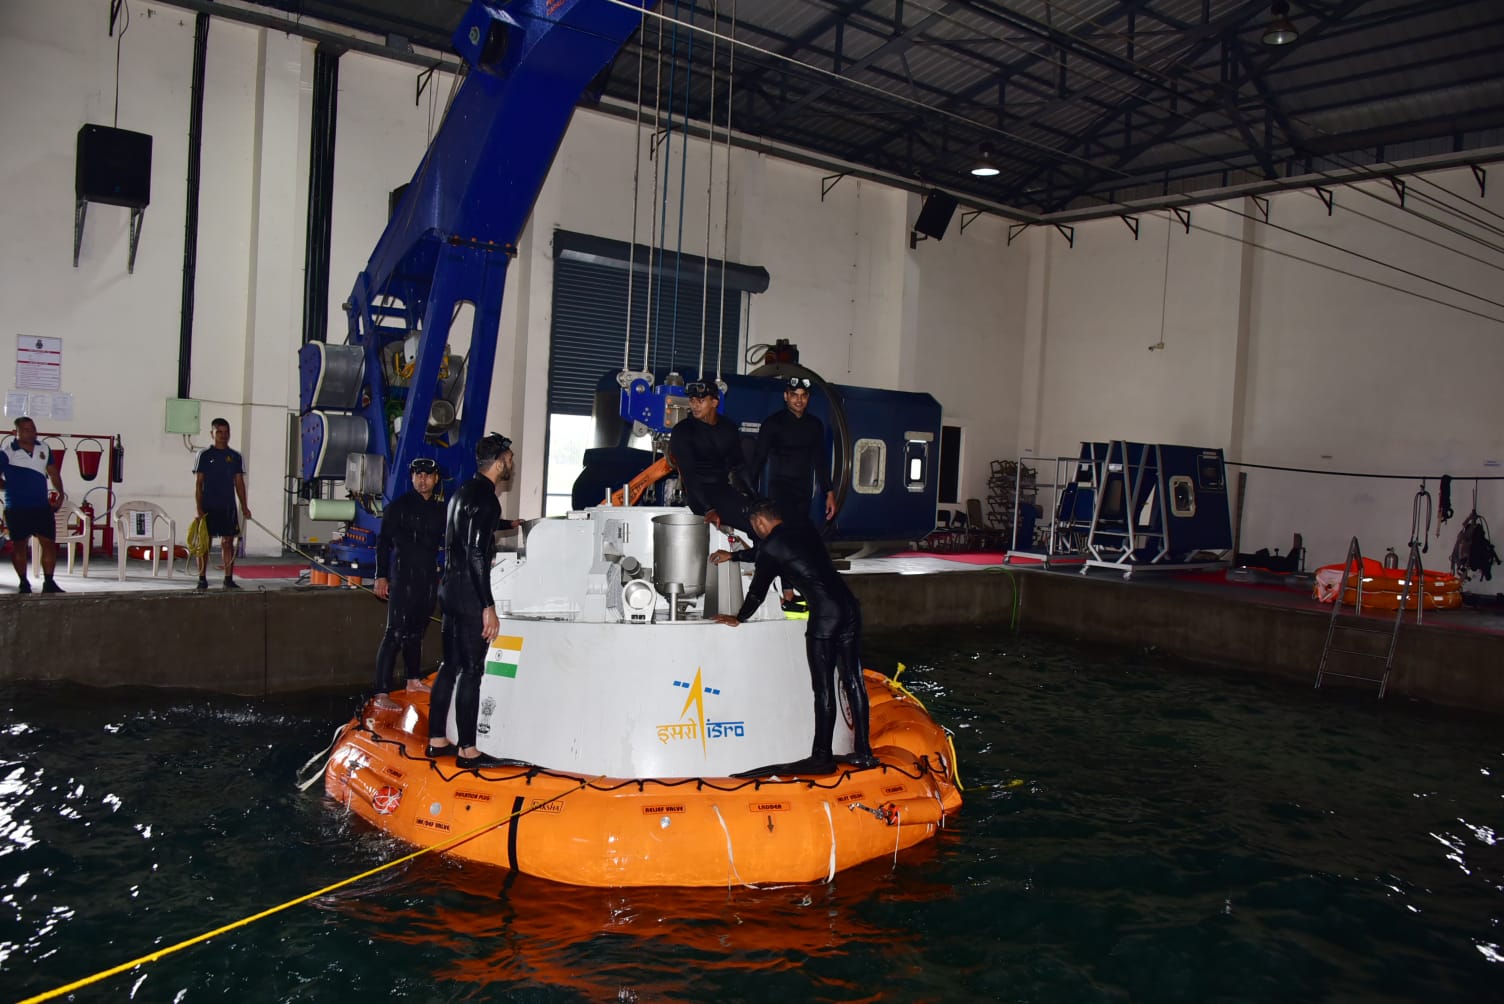 Crew module recovery divers for India’s space mission complete training at Kochi